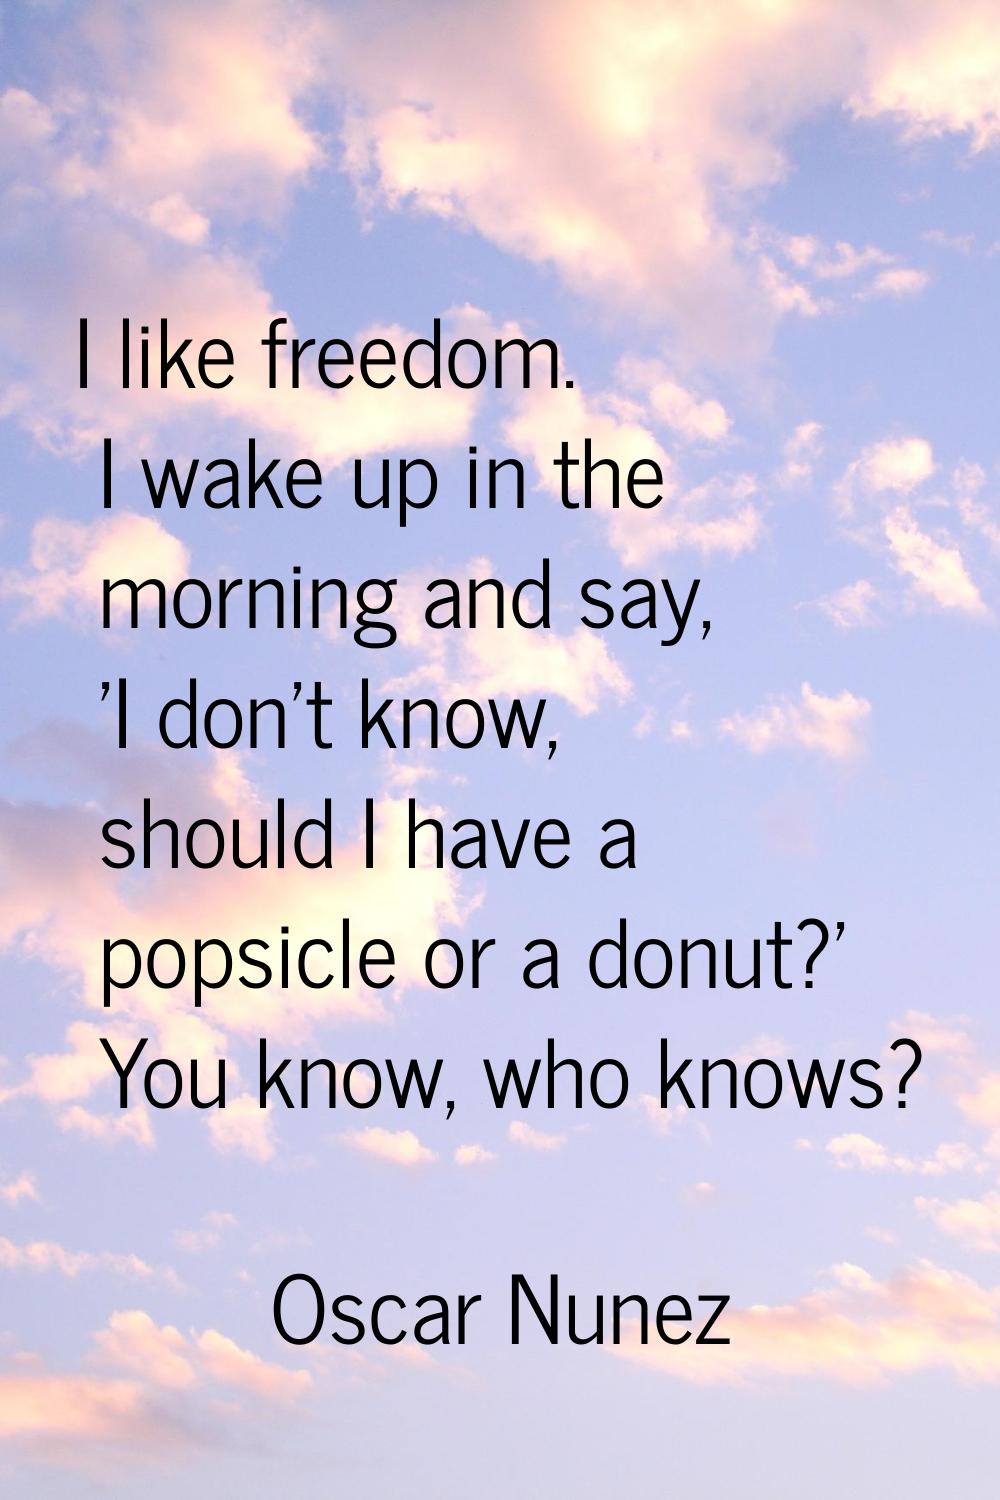 I like freedom. I wake up in the morning and say, 'I don't know, should I have a popsicle or a donu